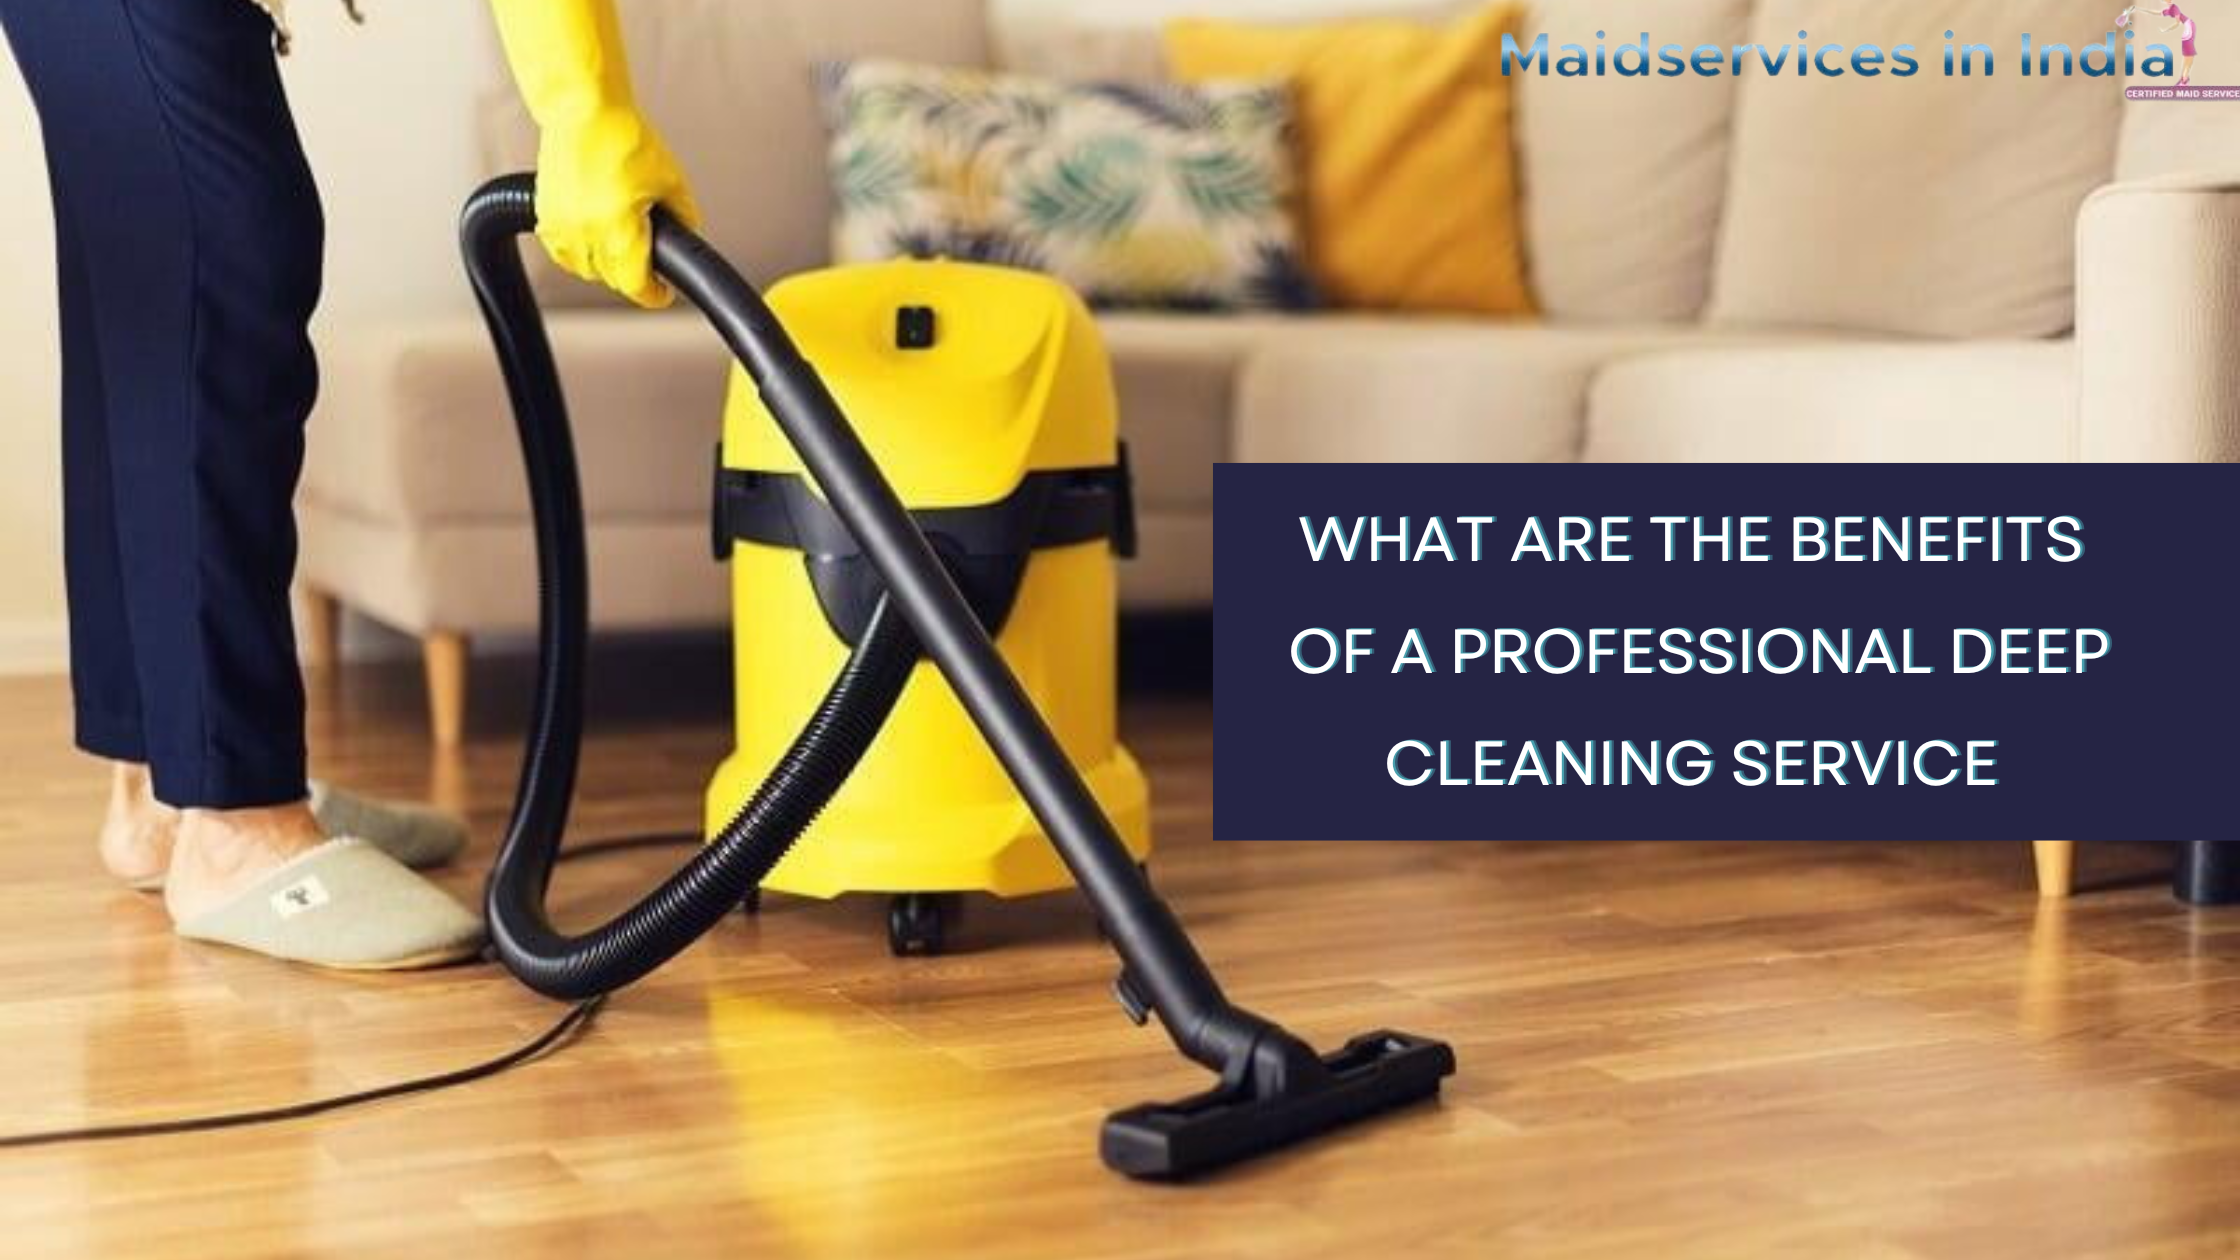 This is where professional deep cleaning services can make a significant difference.